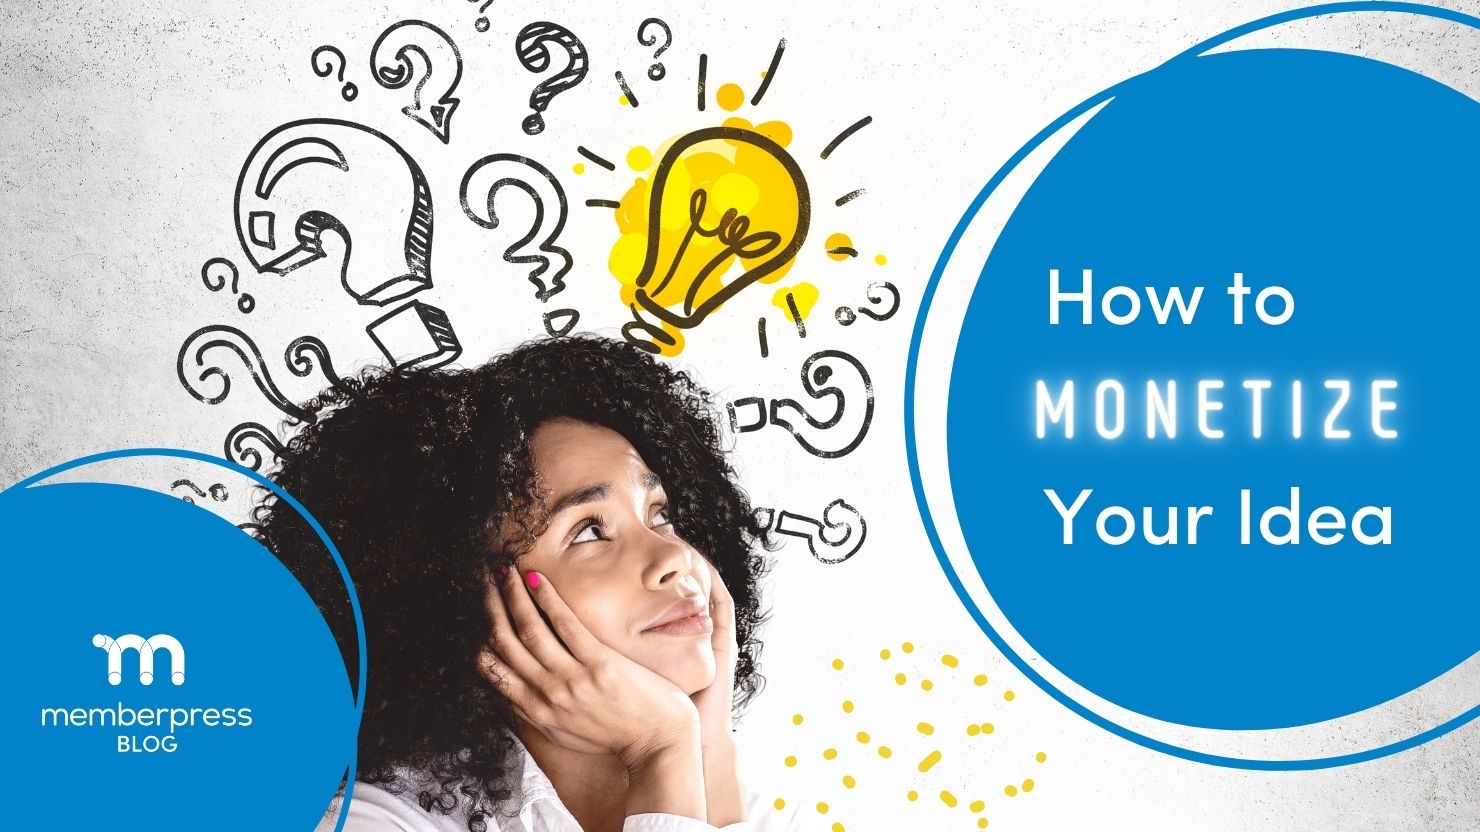 How to monetize your idea